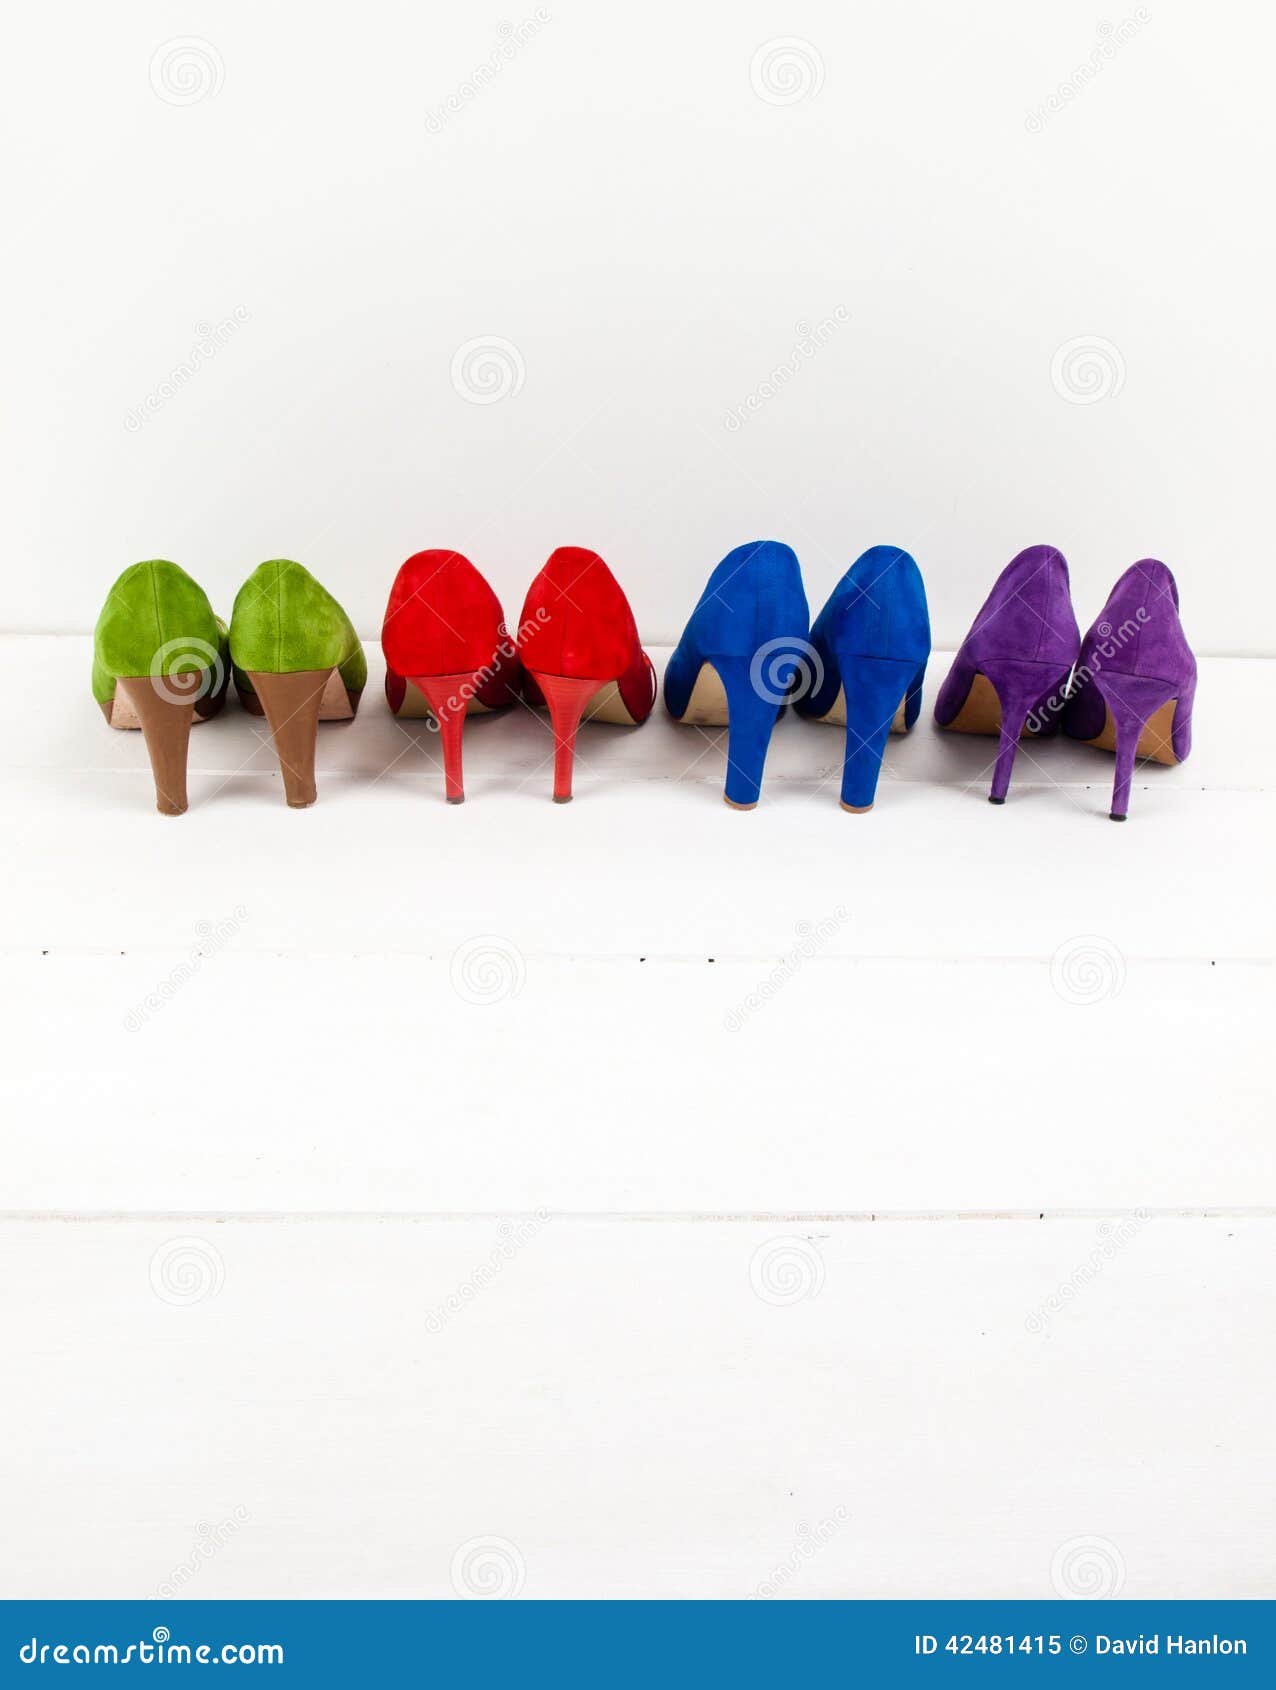 Suede Stiletto Shoes in a Row Stock Image - Image of stylish, high ...